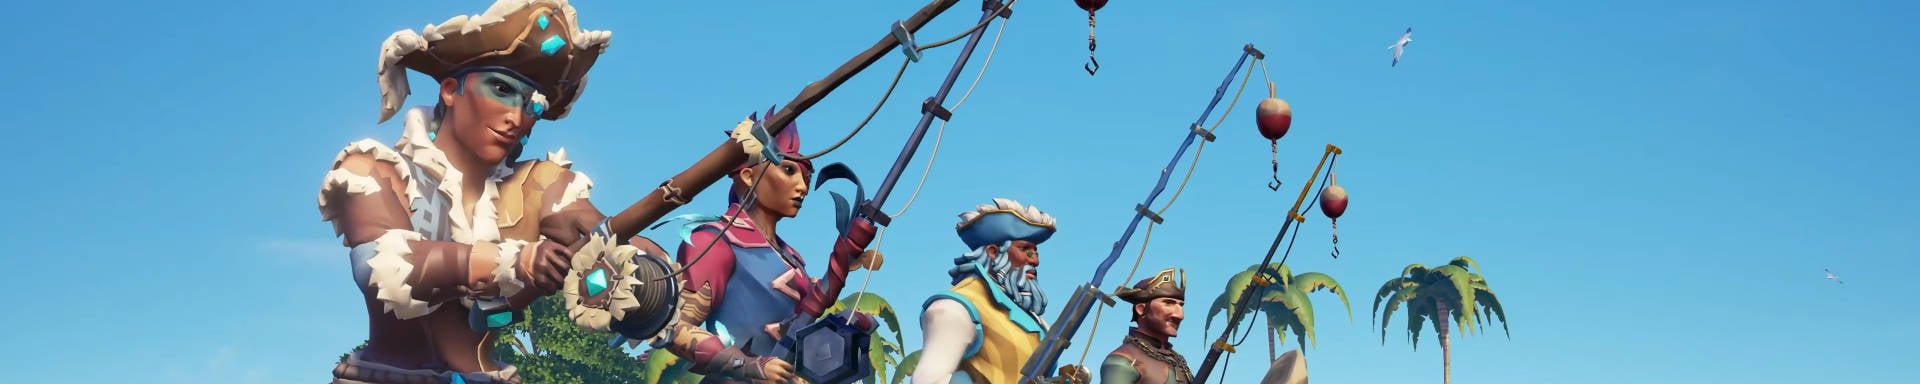 Sea of Thieves Update Festival of Fishing slice